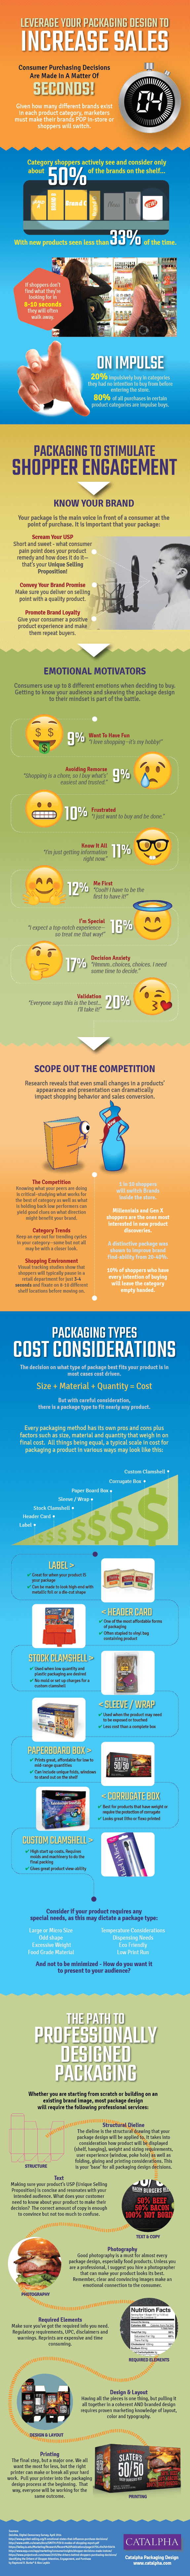 Packaging-Design-Infographic-b